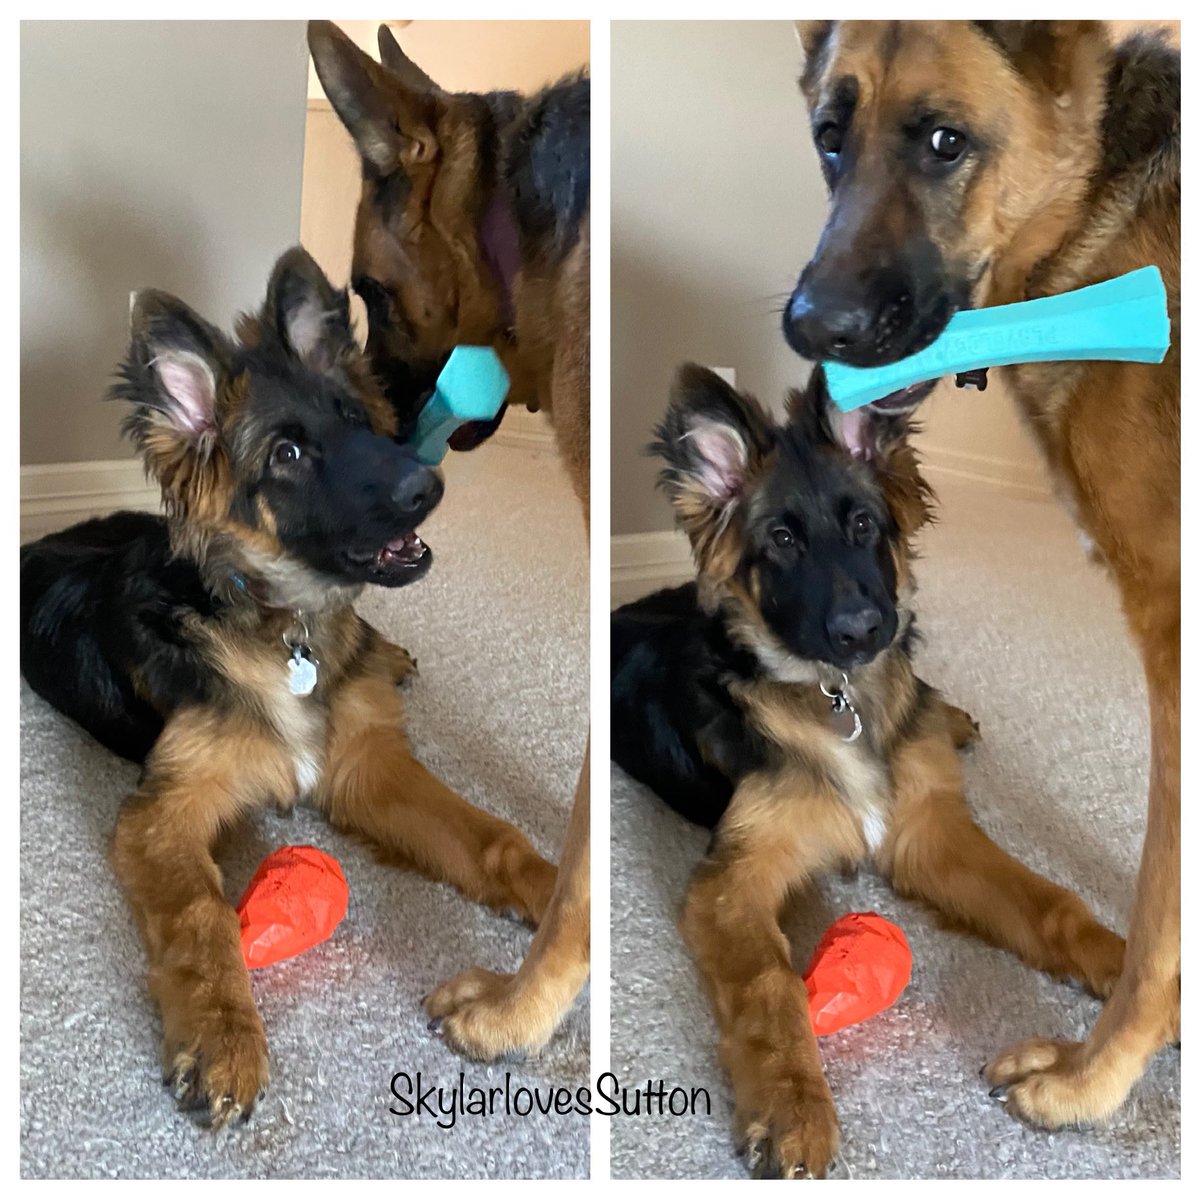 #Thatfeelingwhen you discover your big sister is basically a sour patch kid... #artofthesteal #giveandtake #gsdlife #puppyplay #floof